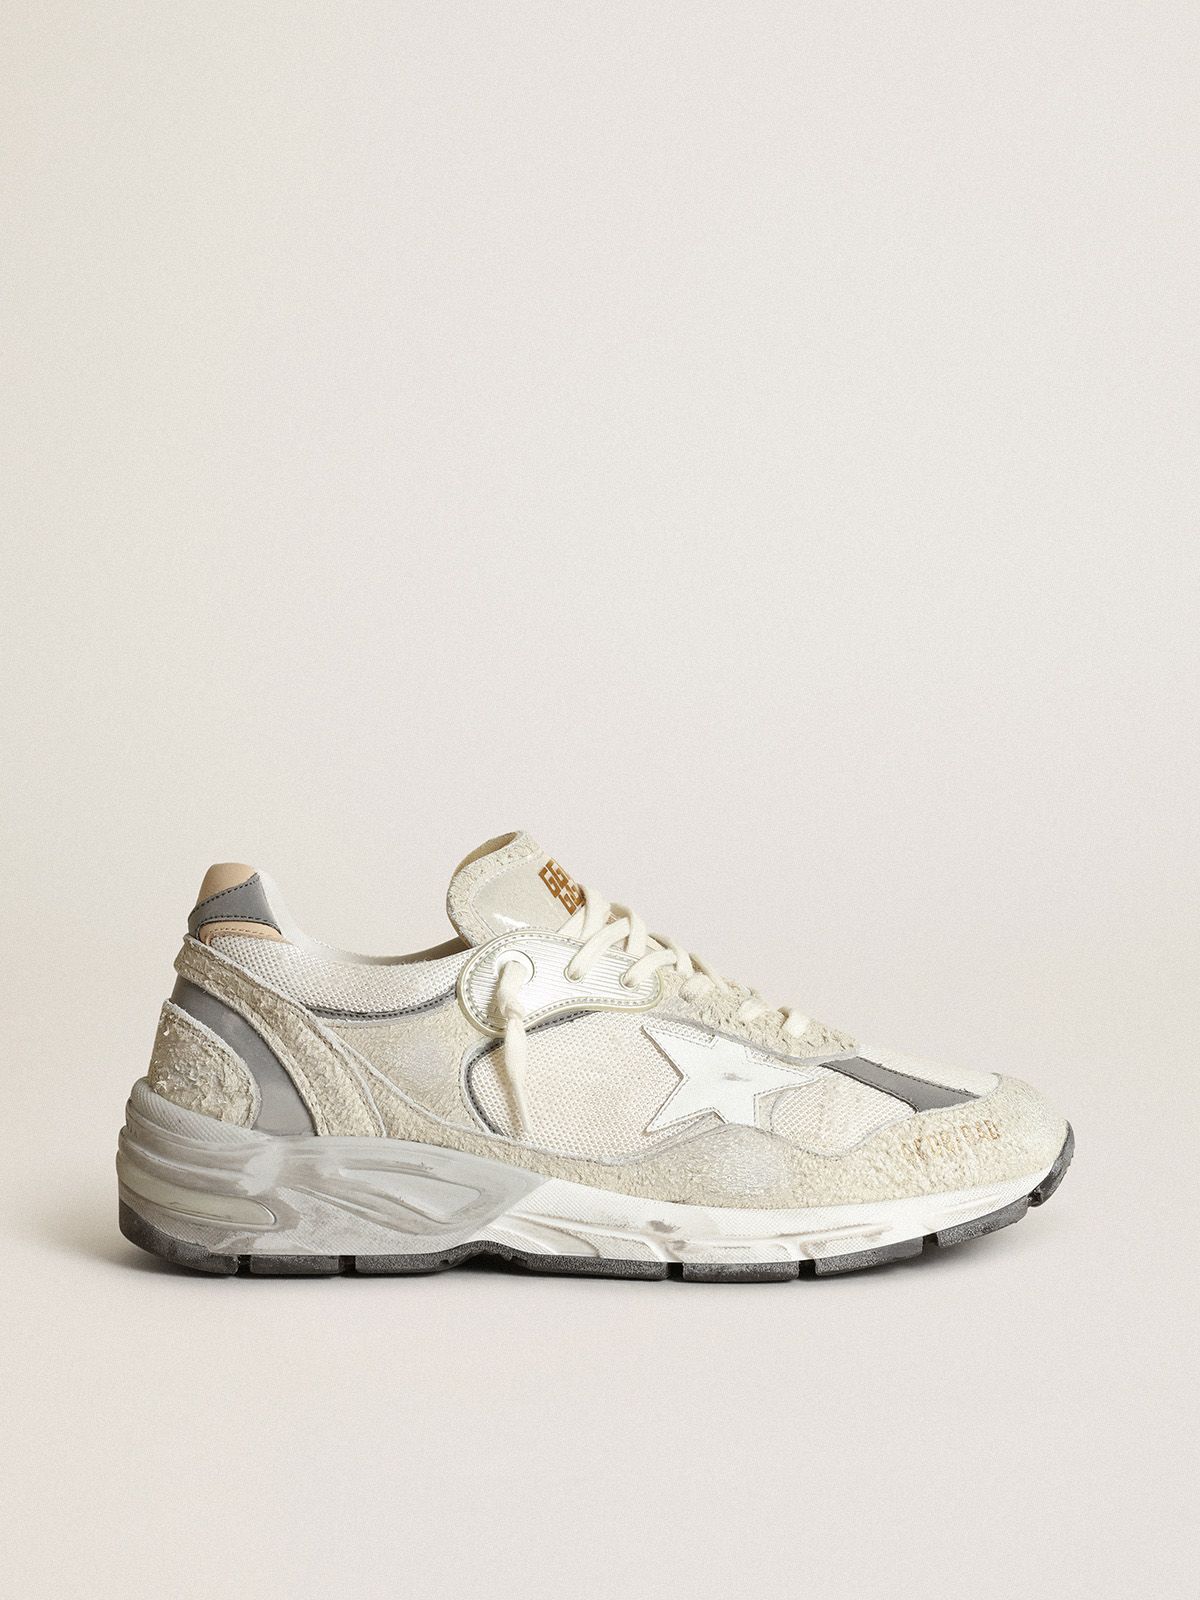 golden goose and with star white leather suede in Dad-Star gray sneakers